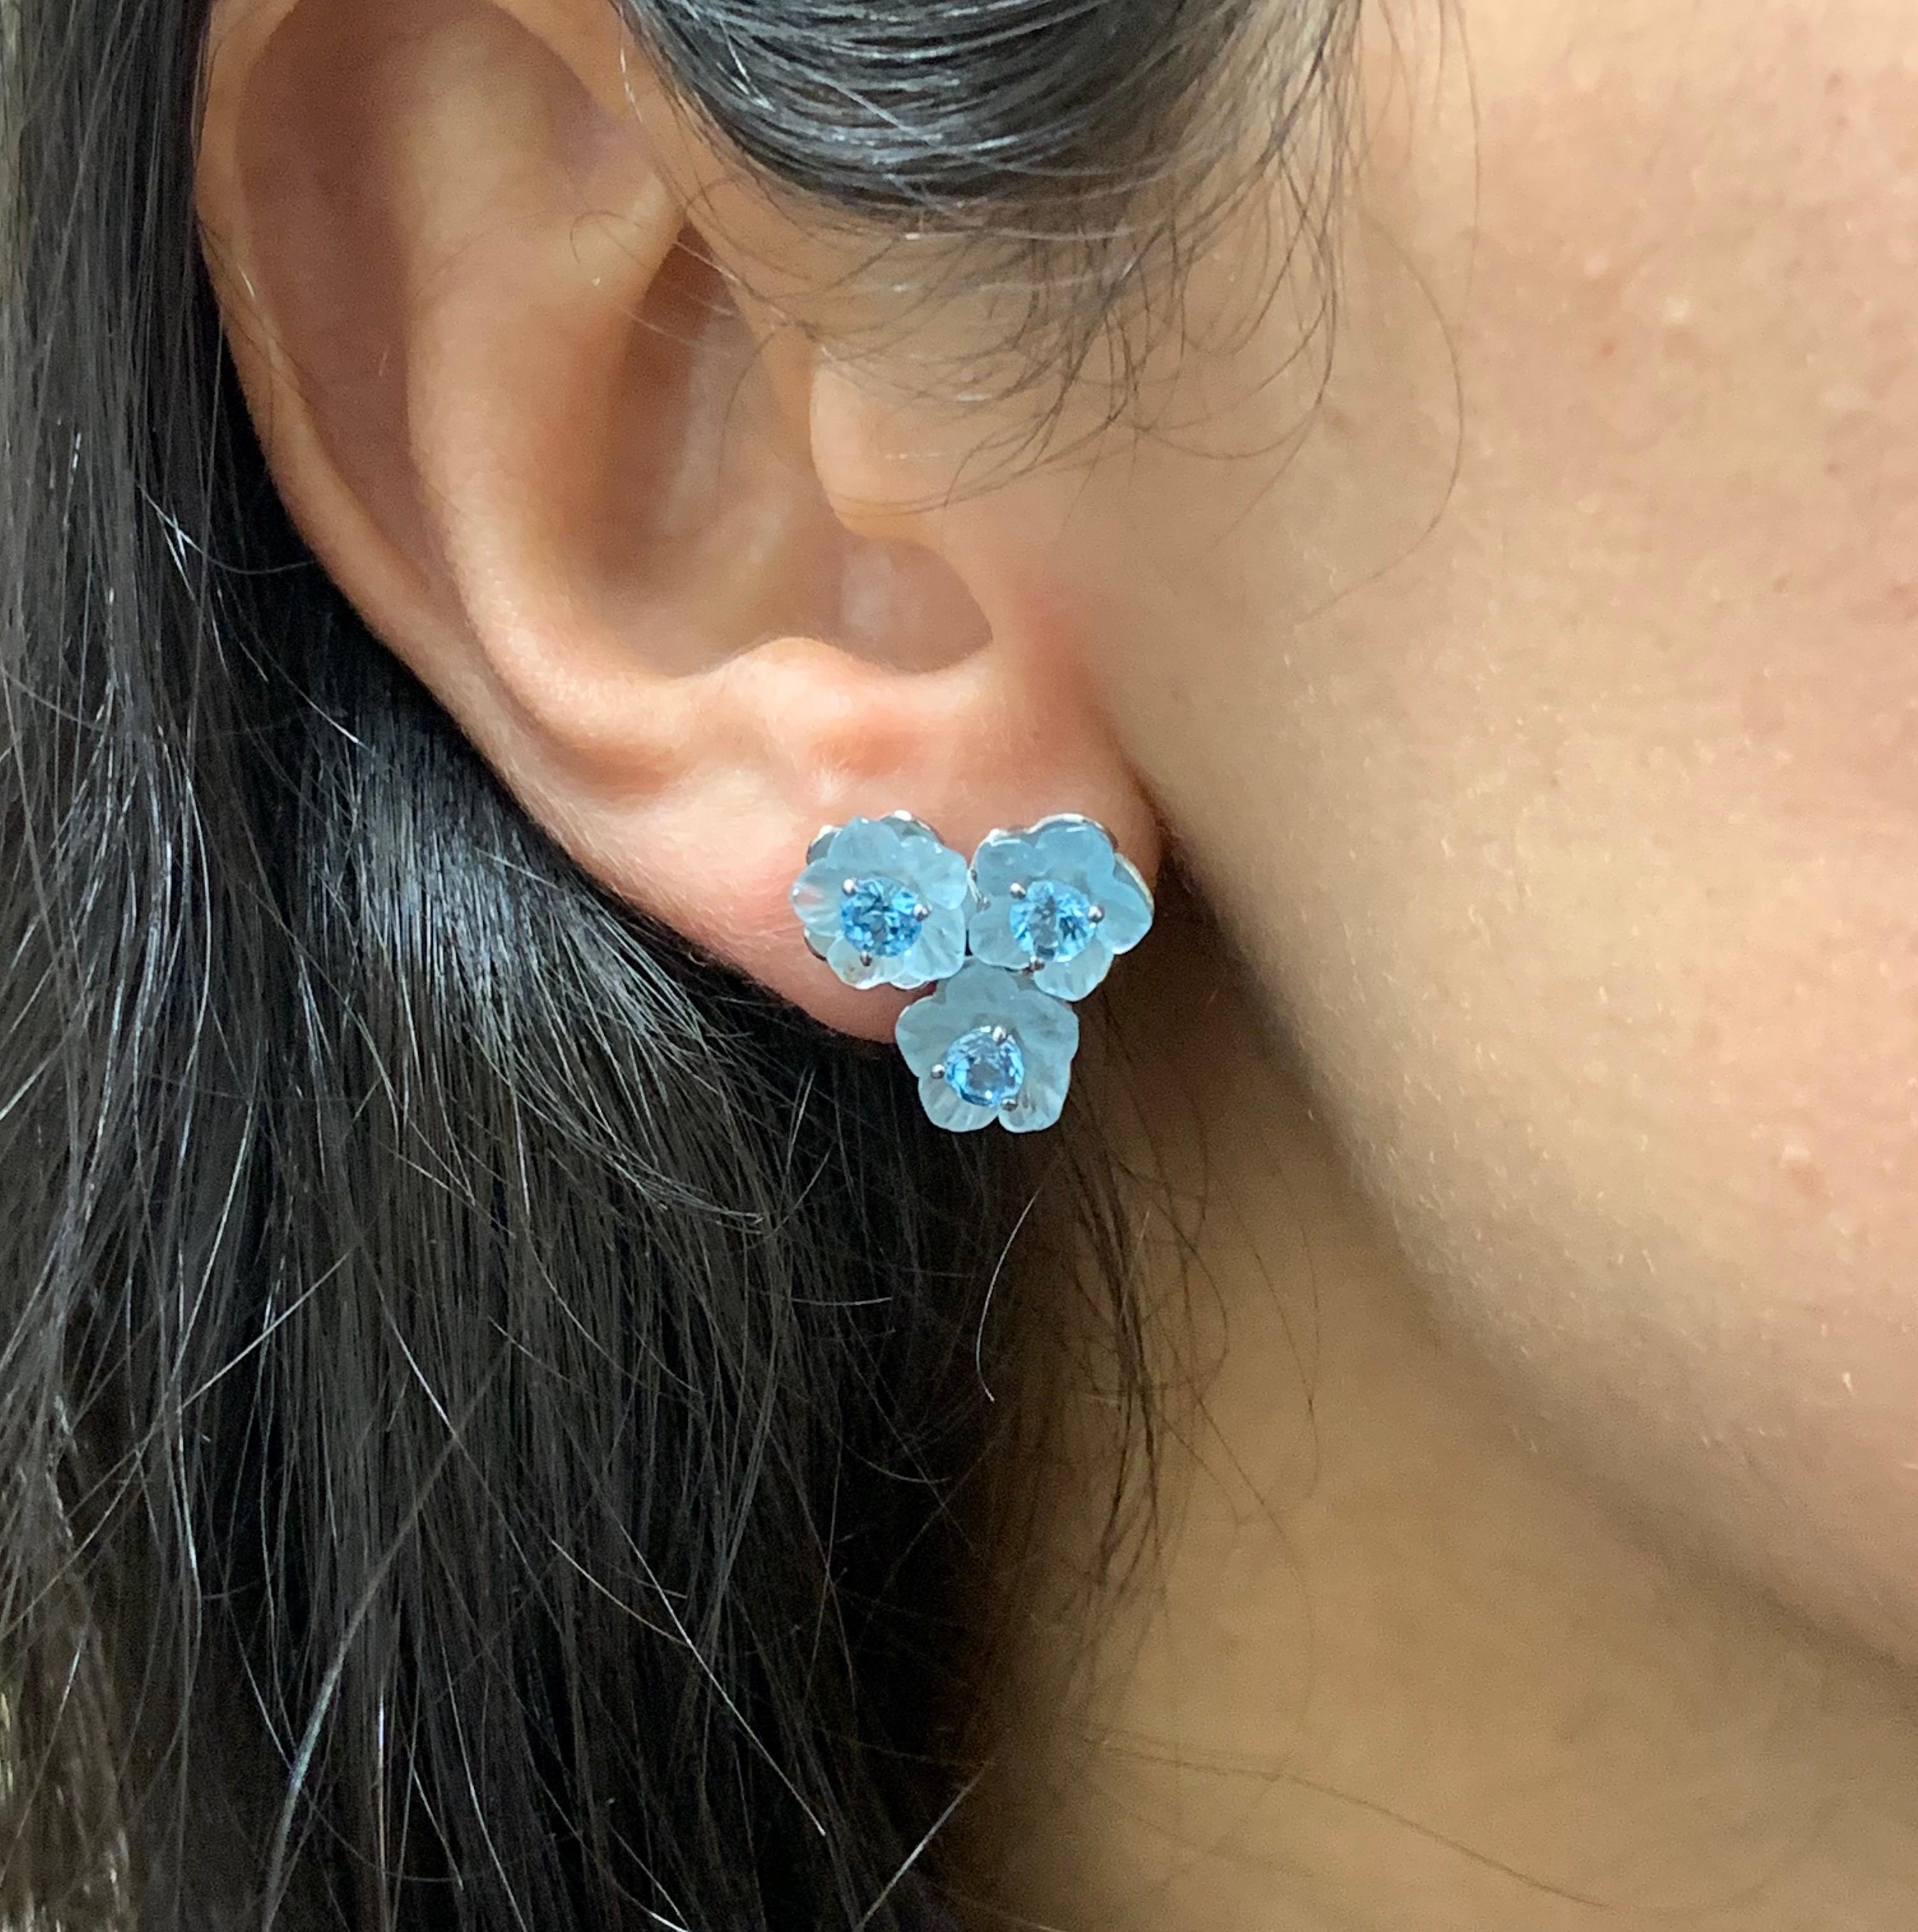 Material: 14k White Gold 
Center Stone Details: 6 Flower Blue Topaz's at 2.30 Carats
Surrounding Stone Details: 6 Round Blue Topaz's at 1.50 Carats 
Pair This With Our 8.75 Carat Blue Topaz and Diamond Flower Necklace, a perfect match!

Fine